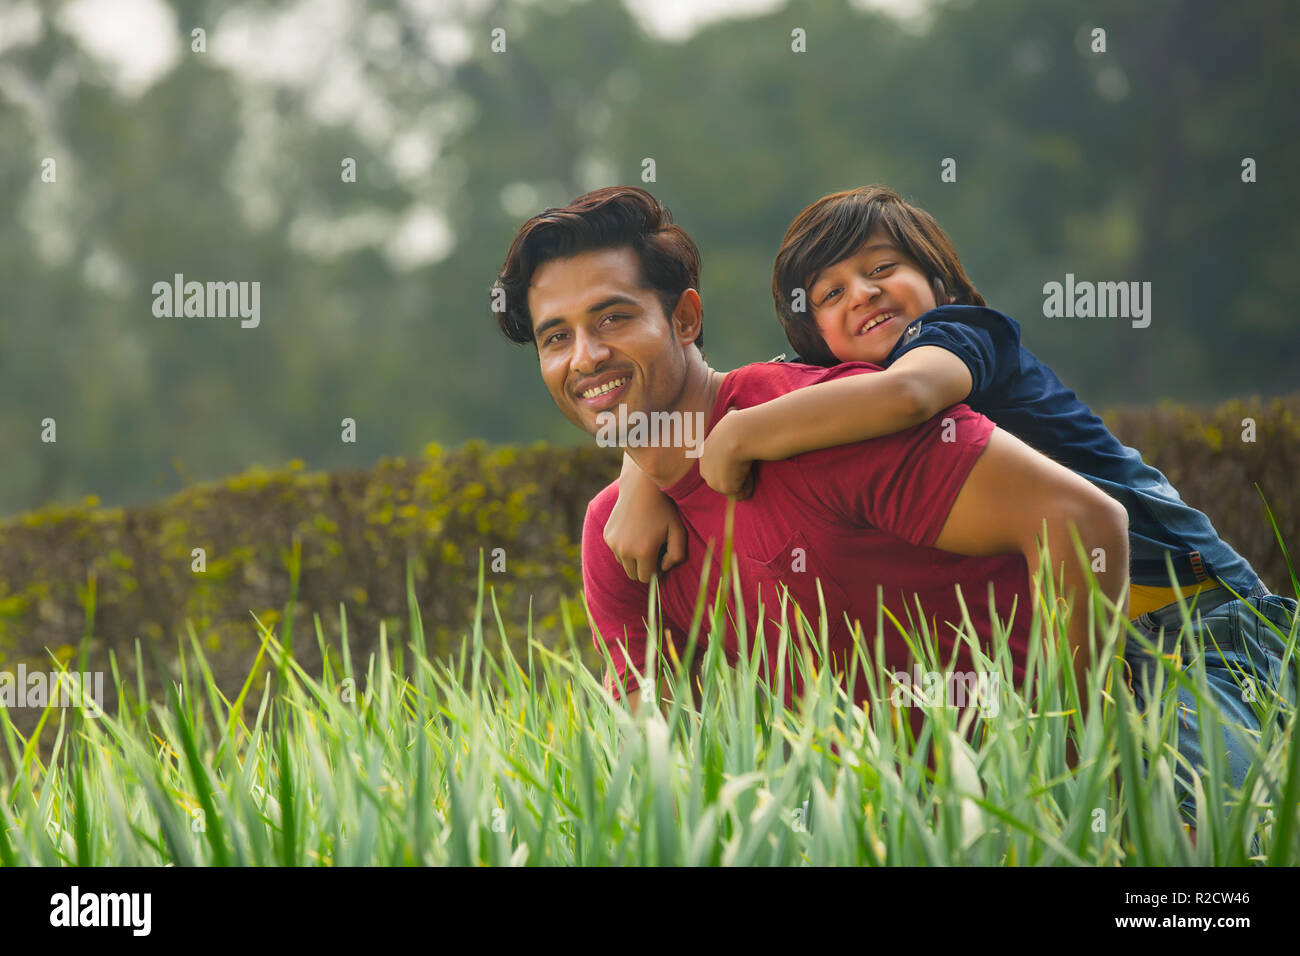 Happy young boy piggy riding on the back of his father outdoors with fresh grass in the foreground. Stock Photo